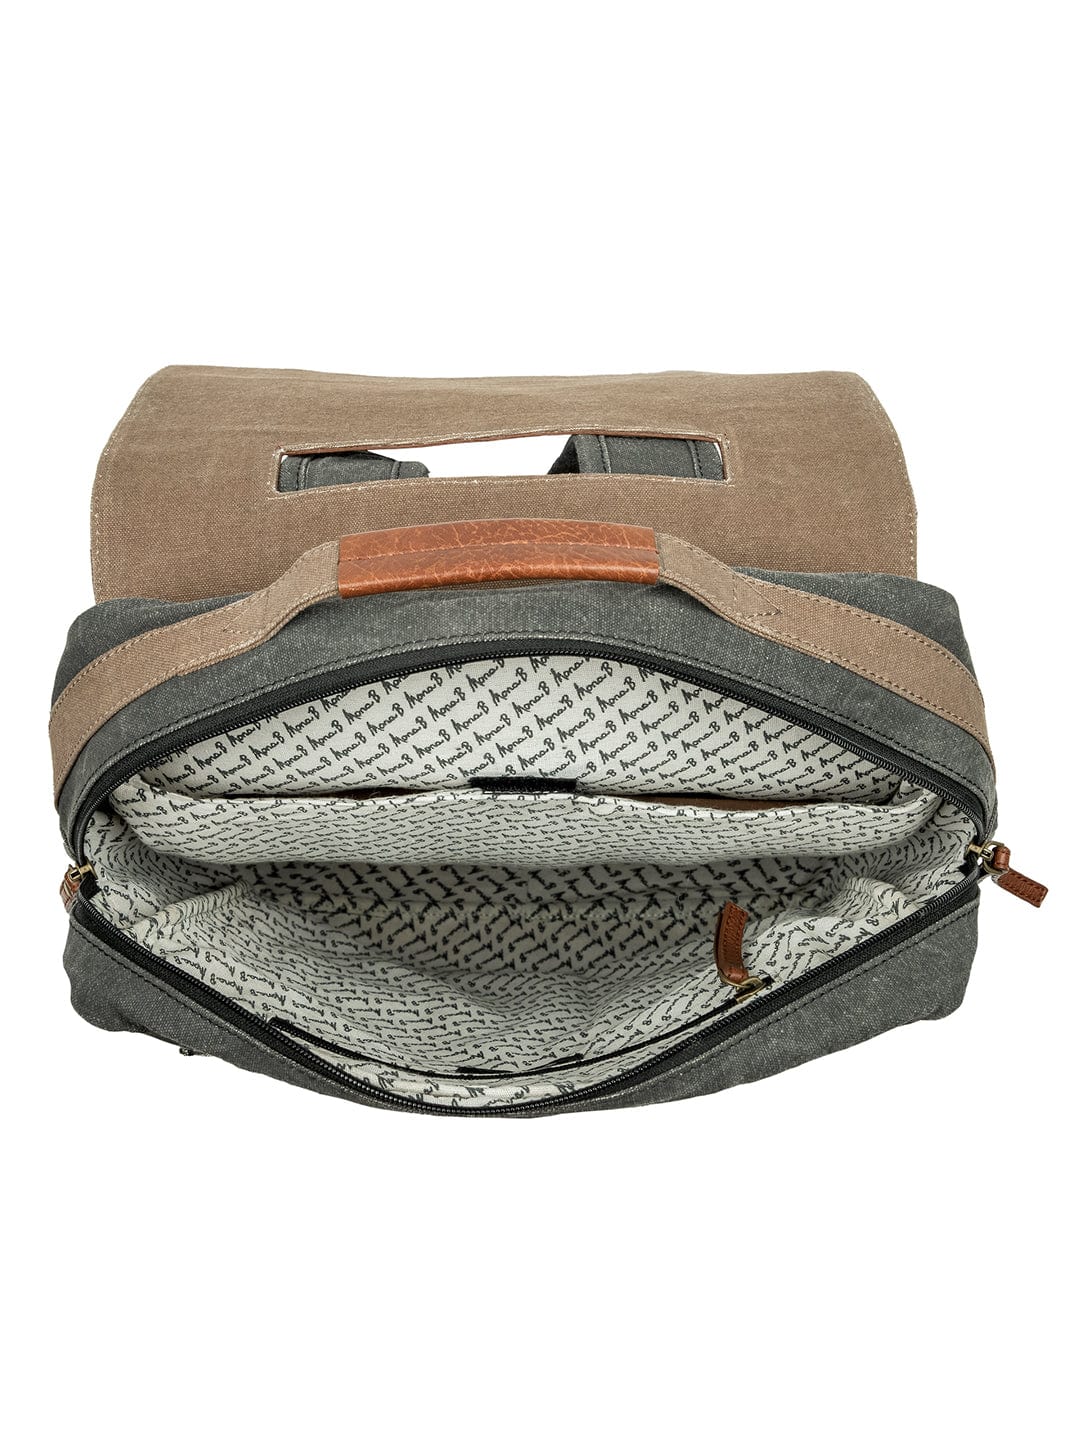 Mona B Upcycled Canvas Backpack for Office | School and College with Upto 14 Laptop/ Mac Book/ Tablet with Stylish Design for Men and Women: Brad - Backpack by Mona-B - Backpack, Deal of The Week, EOSS, Flash Sale, Flat60, Flat70, INT_Backpack, Sale, Shop2999, Shop3999